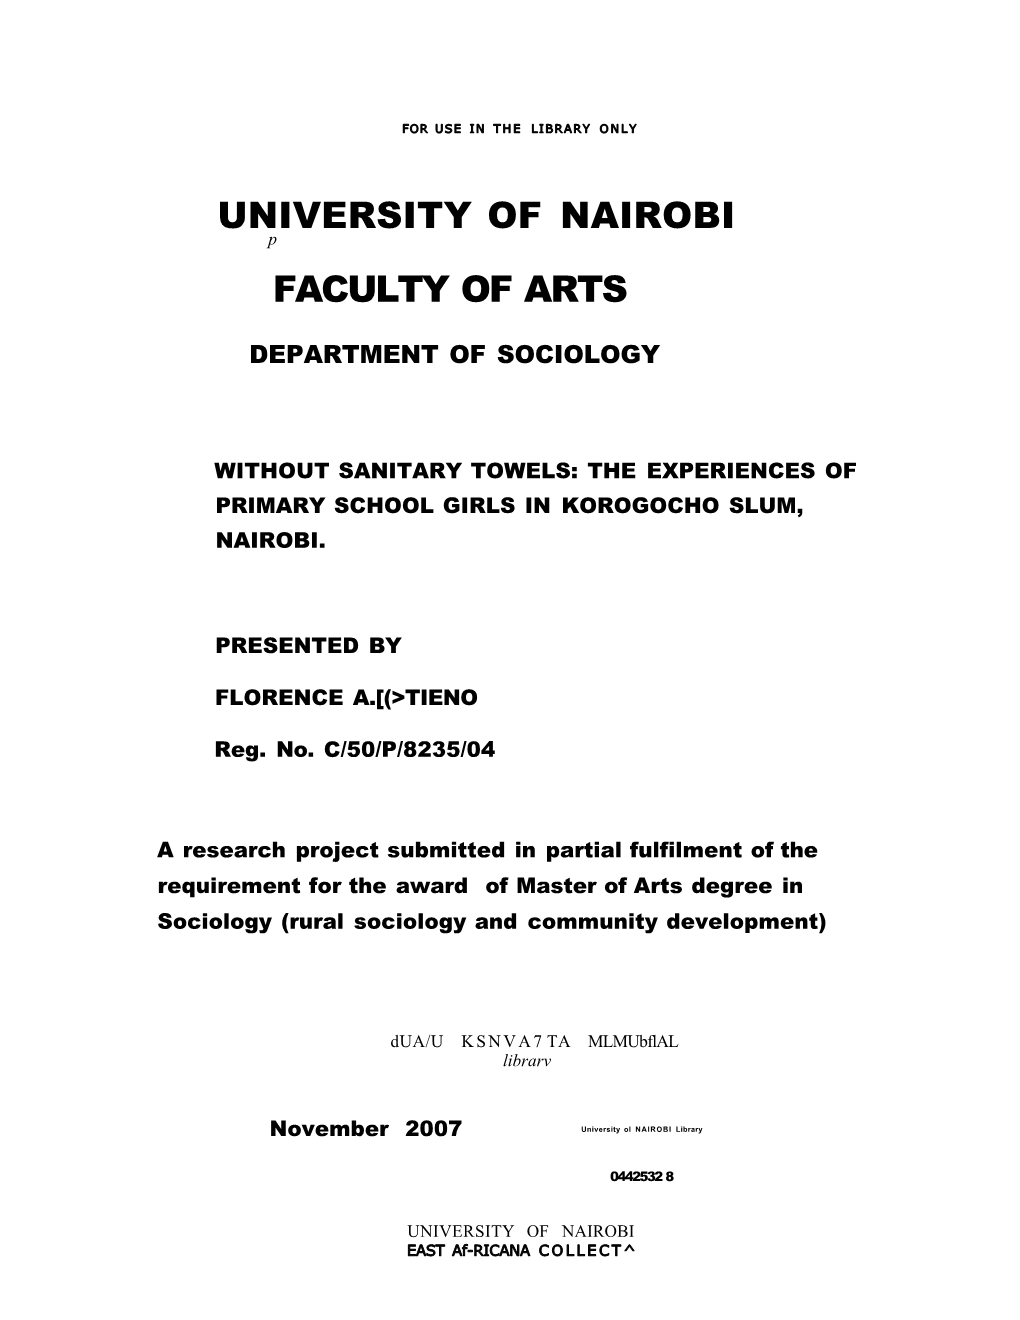 Without Sanitary Towels: the Experiences of Primary School Girls in Korogocho Slum, Nairobi